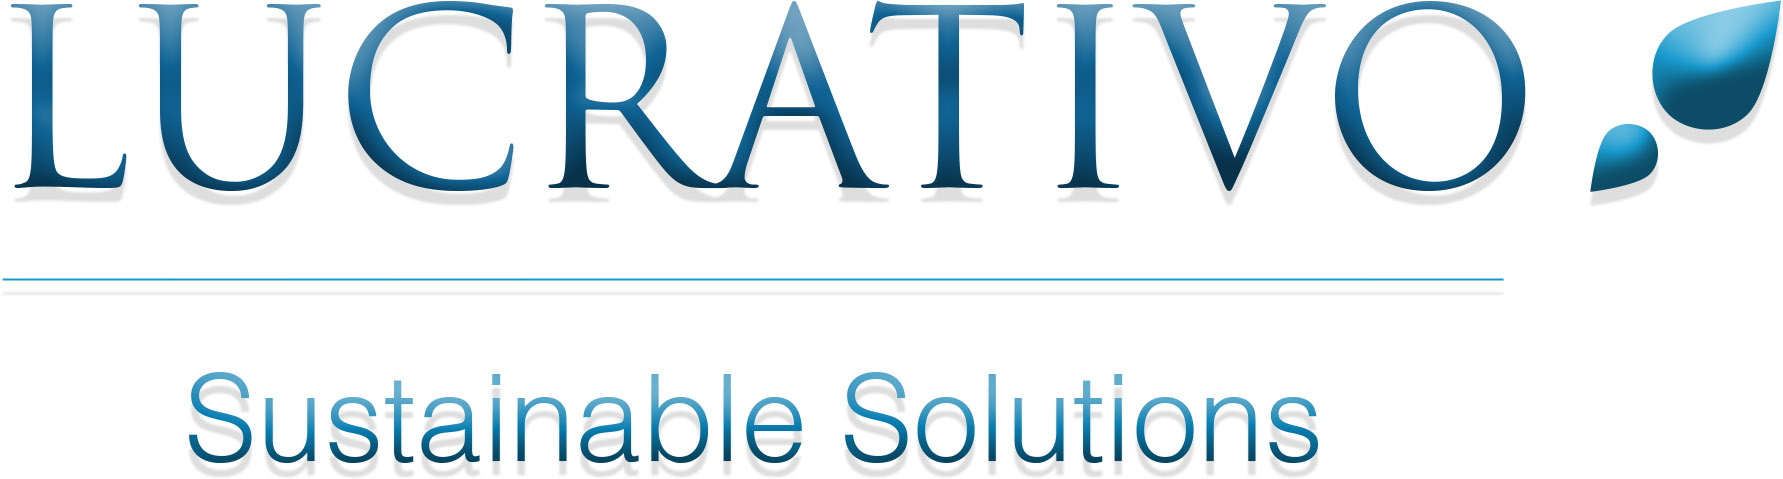 Lucrativo Sustainable Solutions